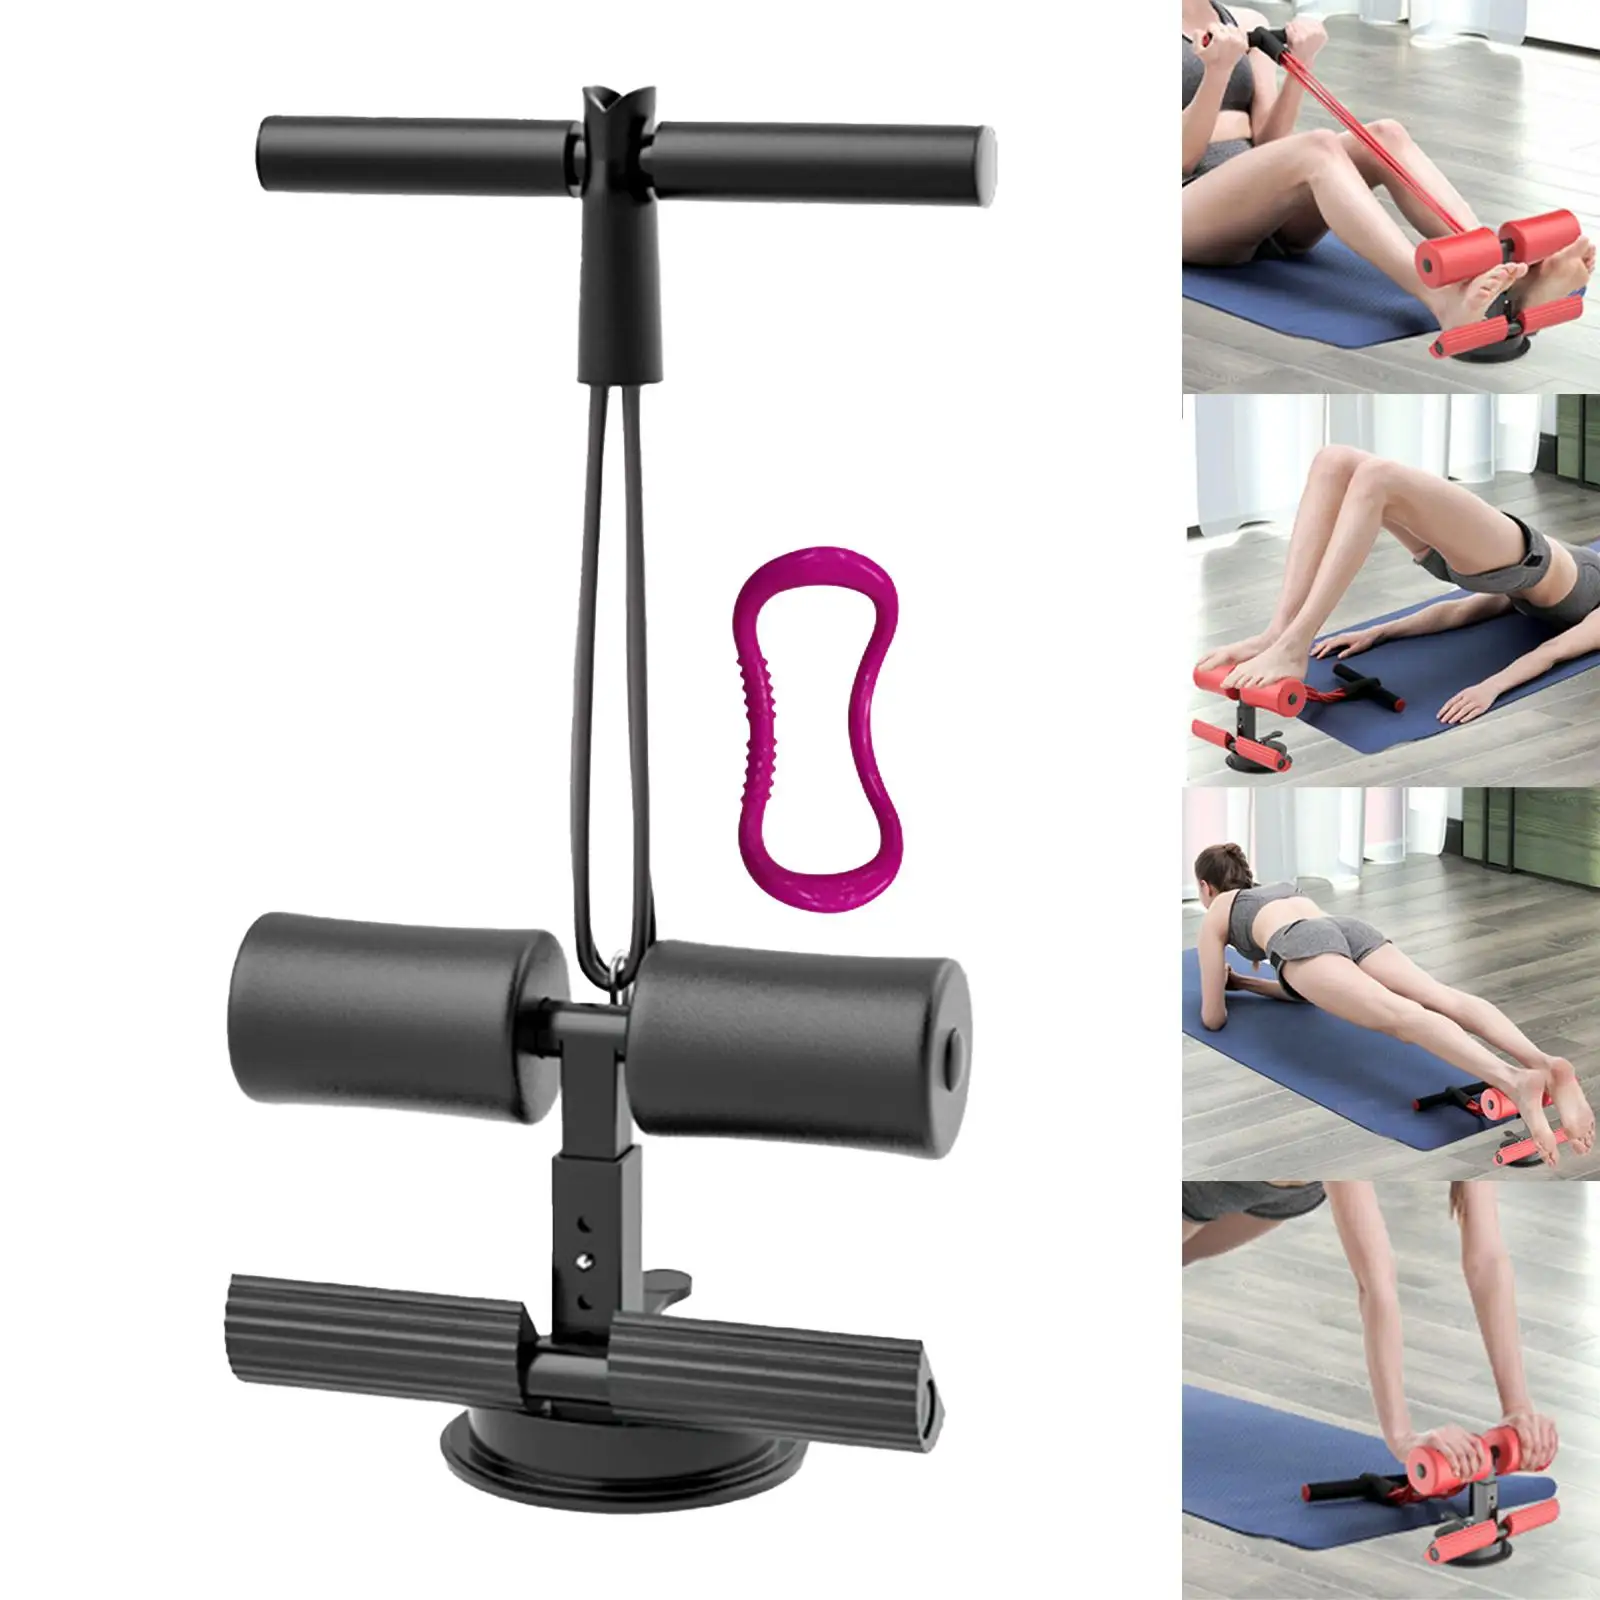 Ankle Support Fittings Aids Machine Sit up Rack for Fitness Workout Travel